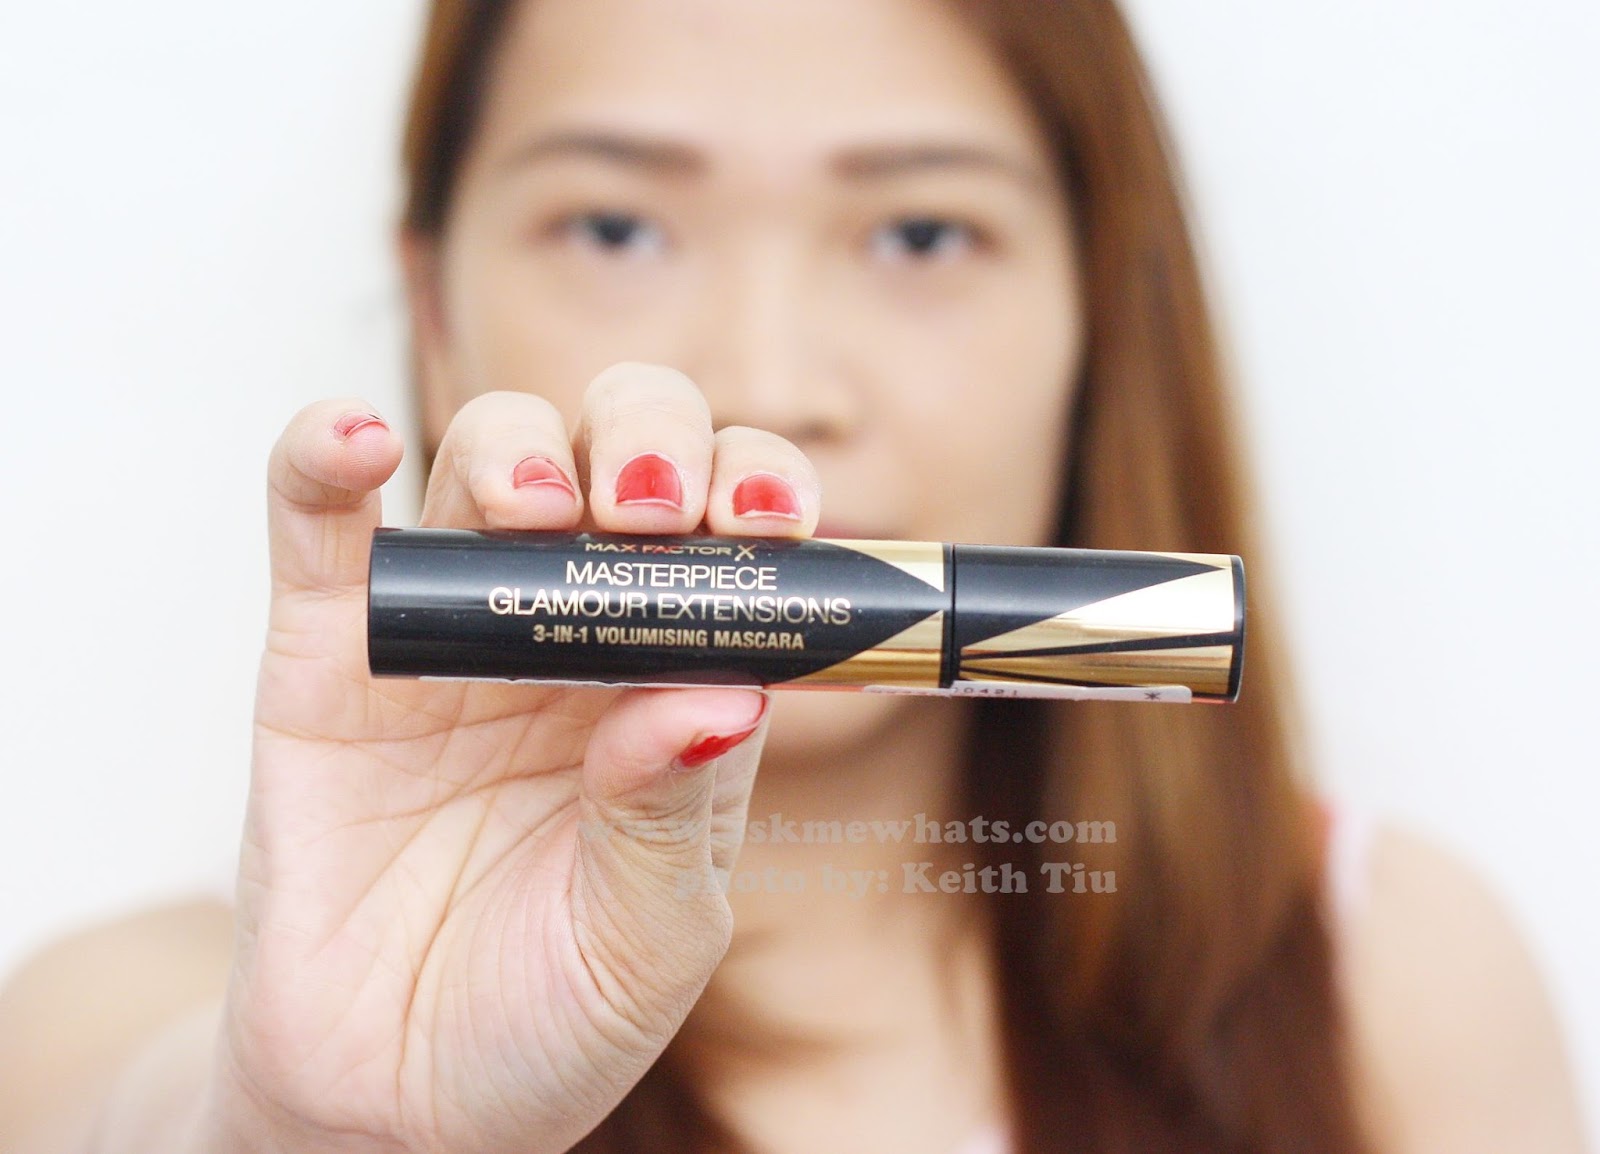 Max Factor X Masterpiece Glamour Extensions 3-in-1 Volumising Review